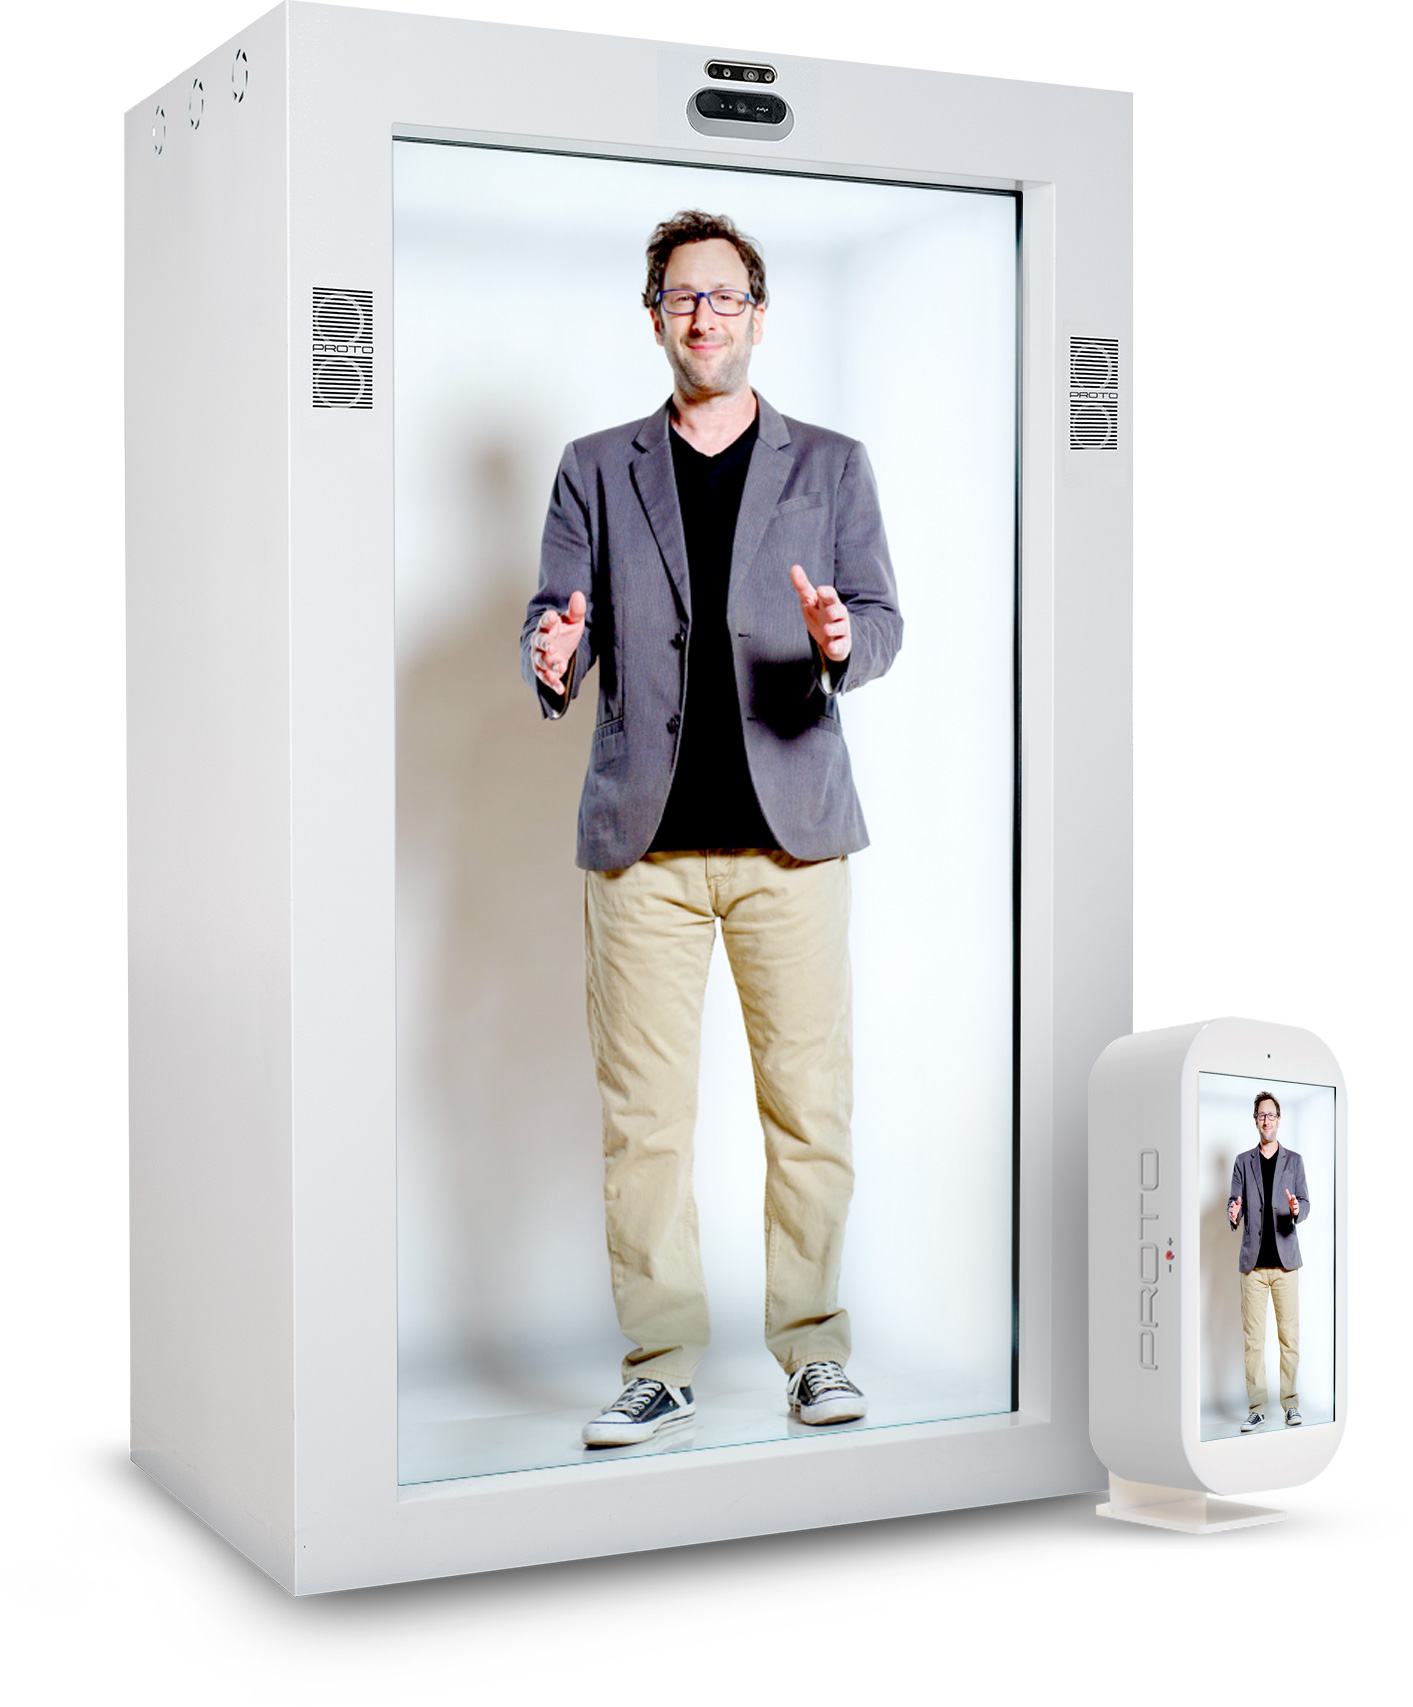 Proto Inc.'s Epic life-sized hologram device, standing at a towering 7 feet. Credit: Proto Inc. Beam There